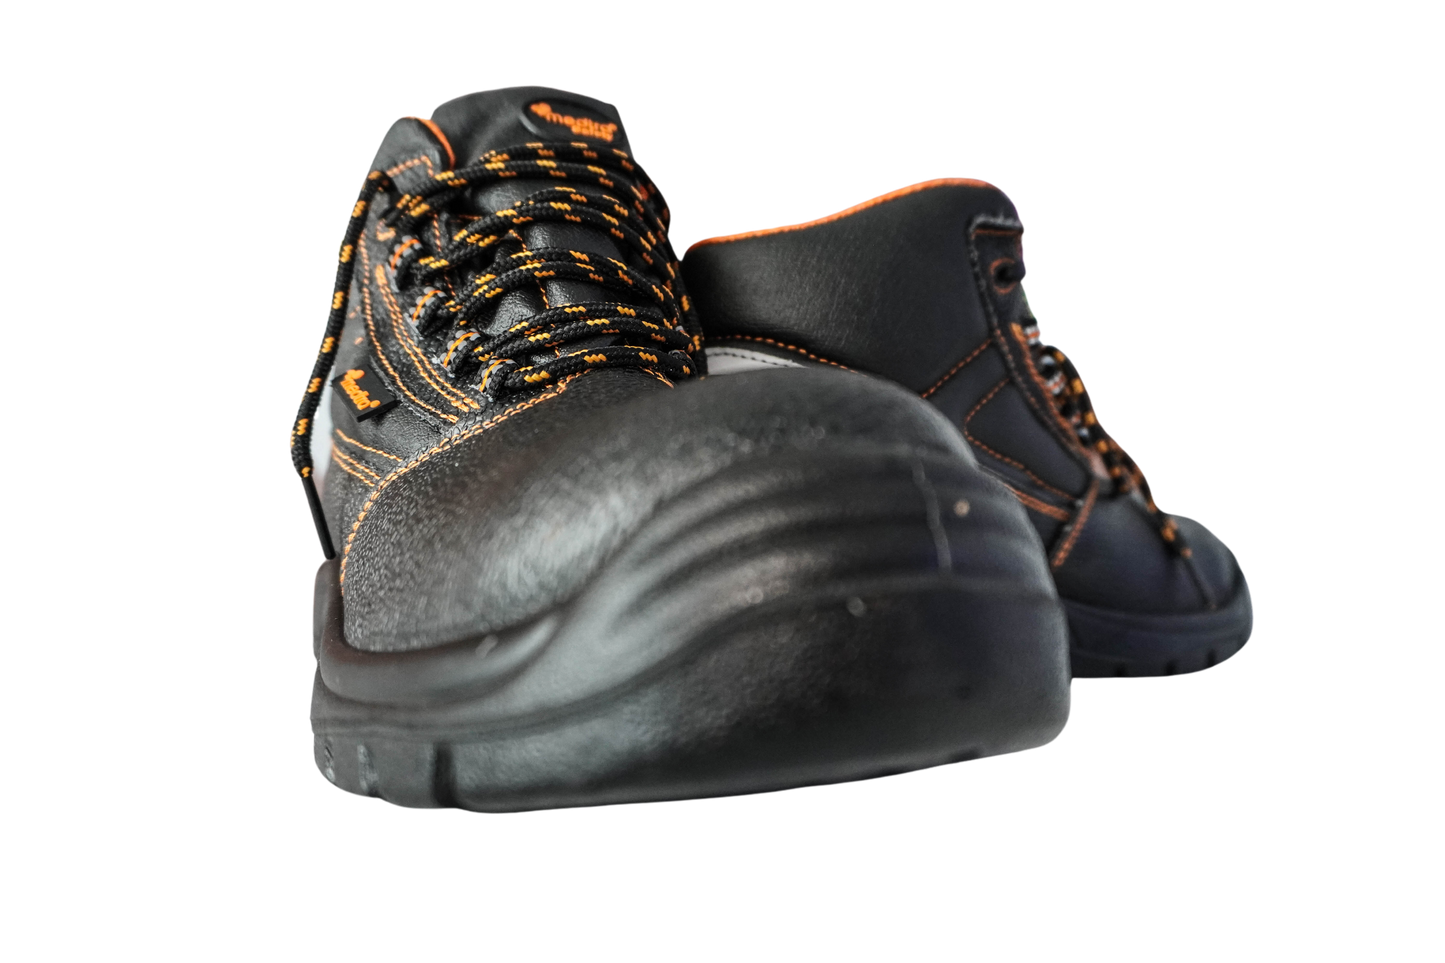 Alpha one Safety shoes - 524